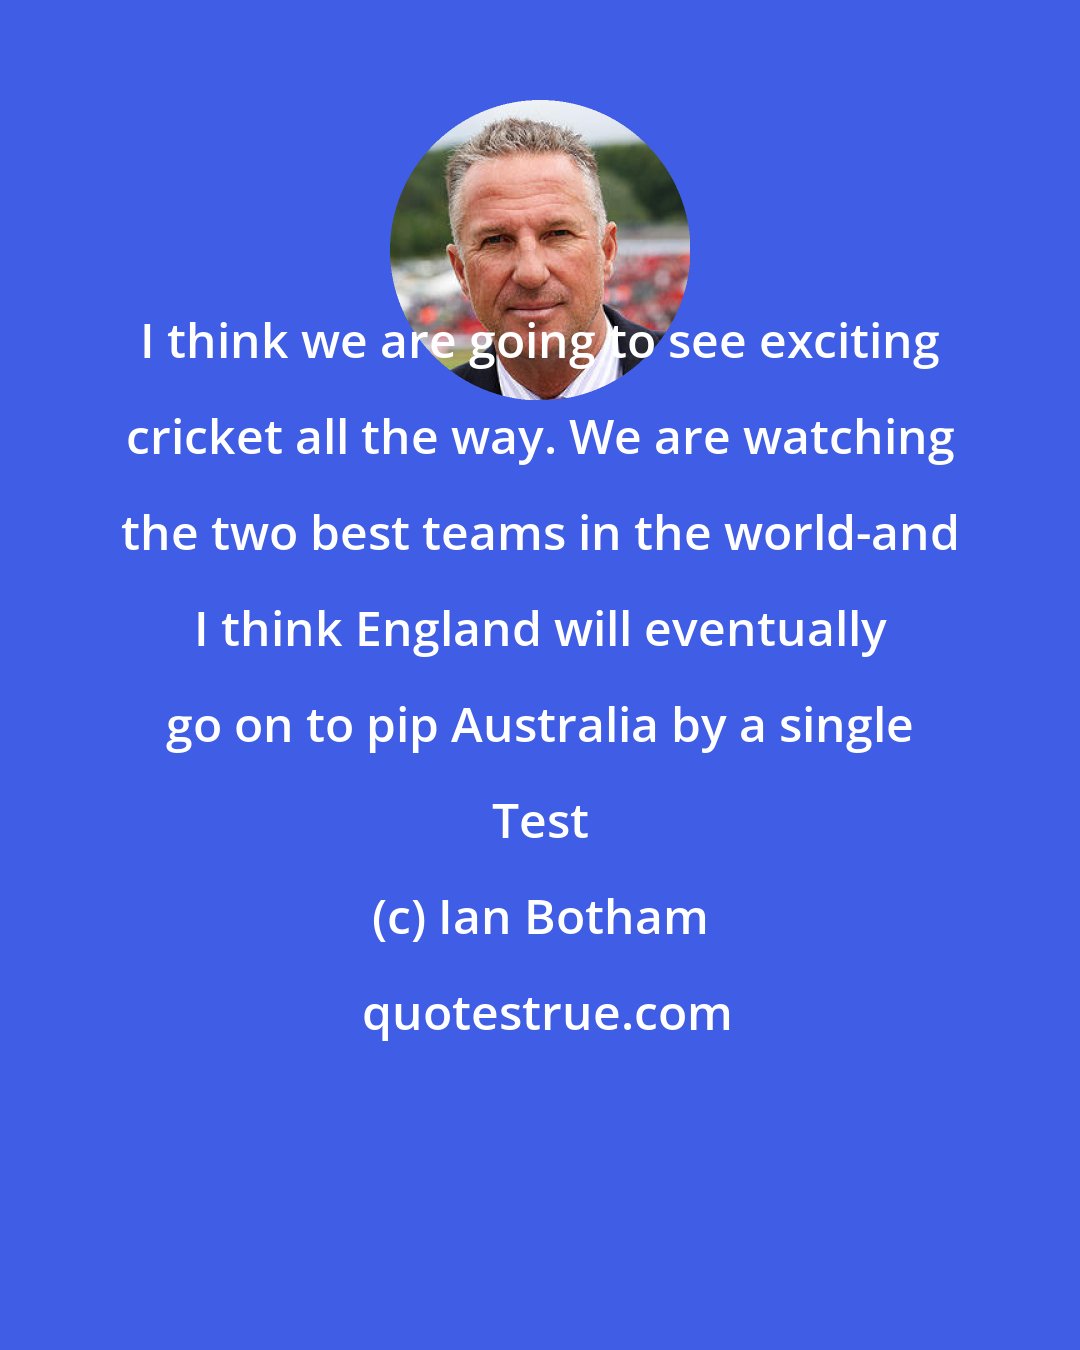 Ian Botham: I think we are going to see exciting cricket all the way. We are watching the two best teams in the world-and I think England will eventually go on to pip Australia by a single Test